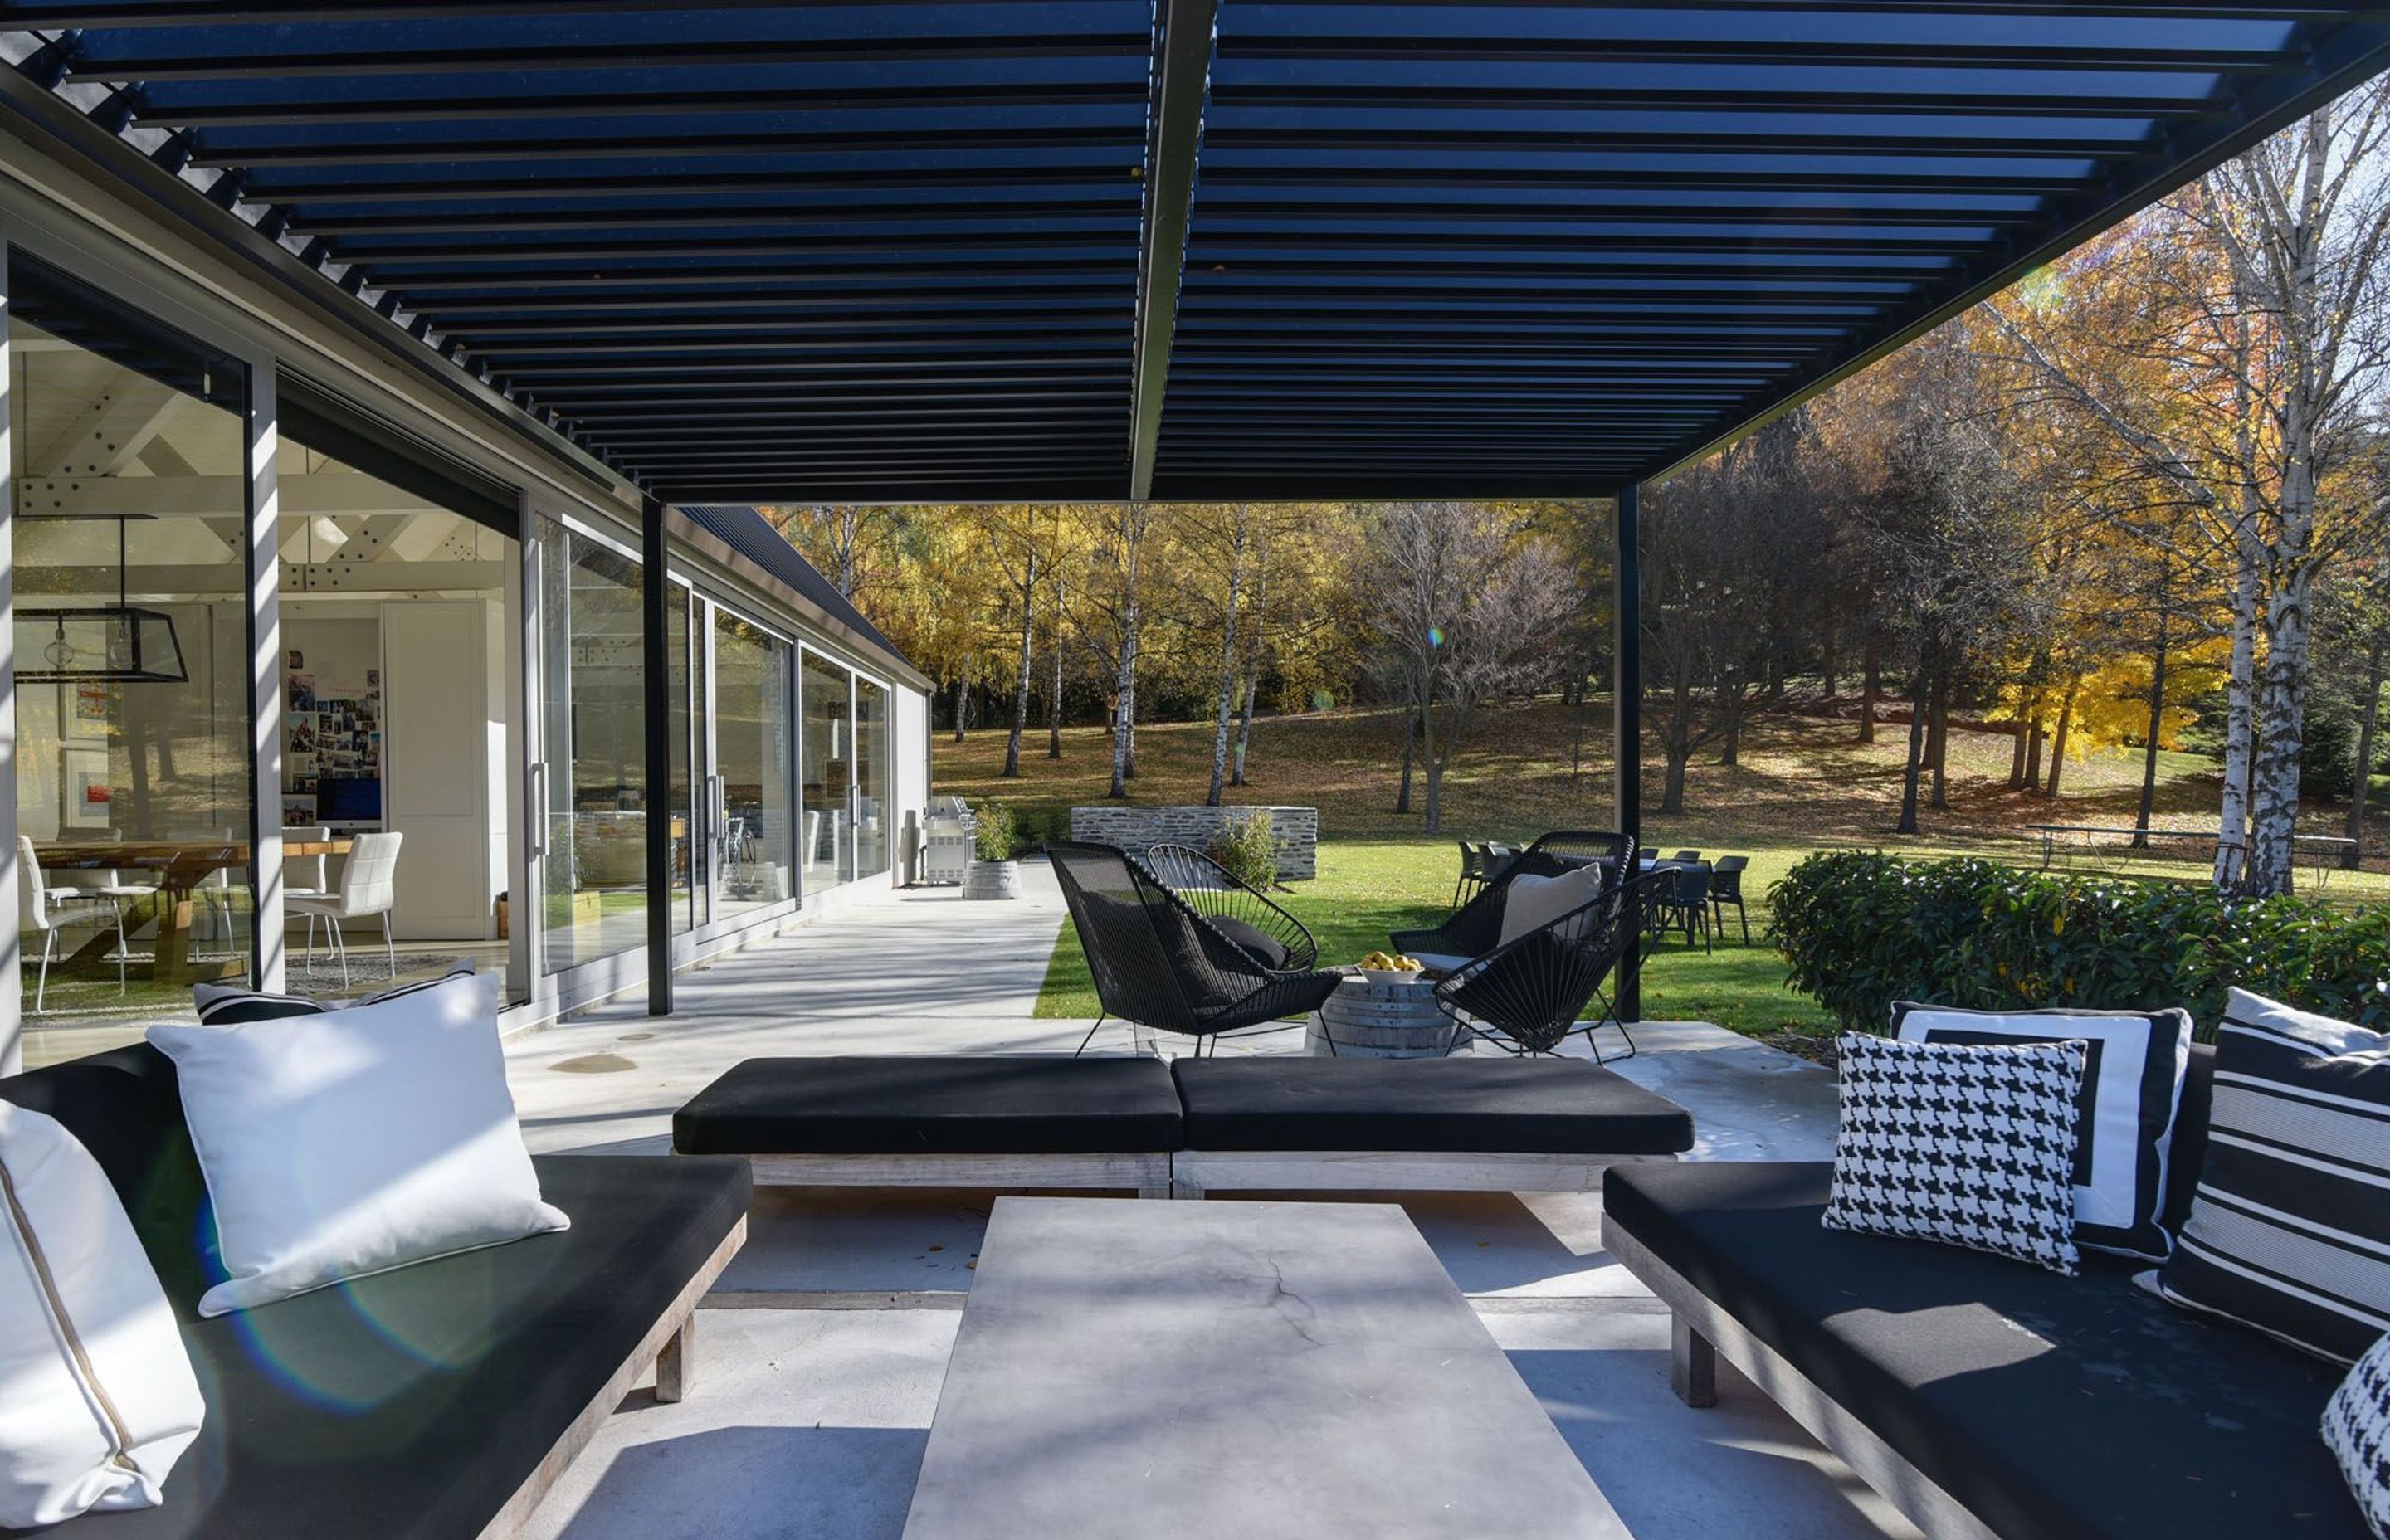 With an outdoor room, it's easy to enjoy Arrowtown's autumn colours.